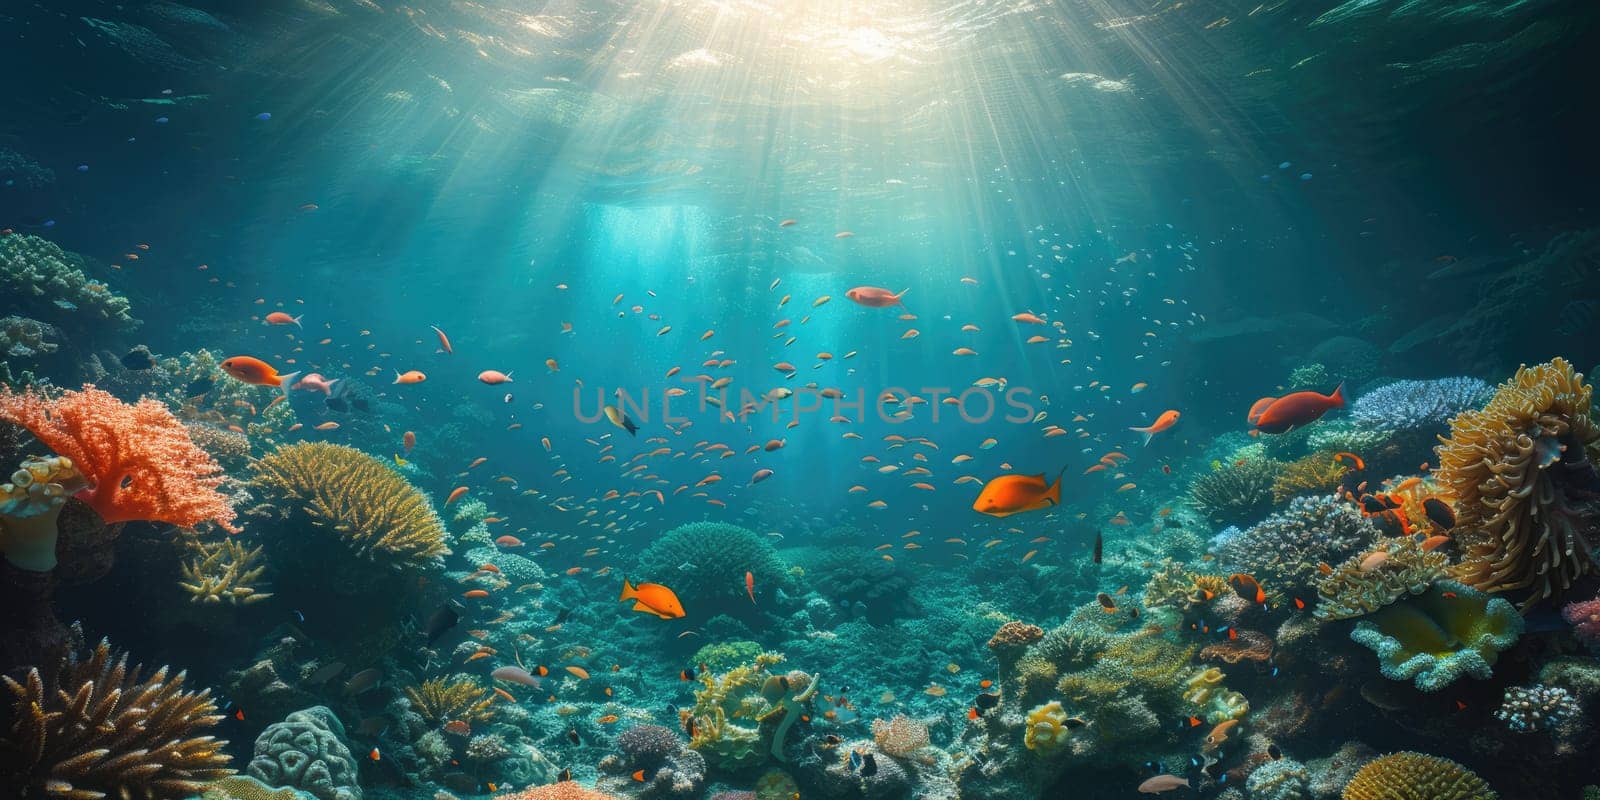 An underwater coral reef scene, diverse marine life. Resplendent. by biancoblue